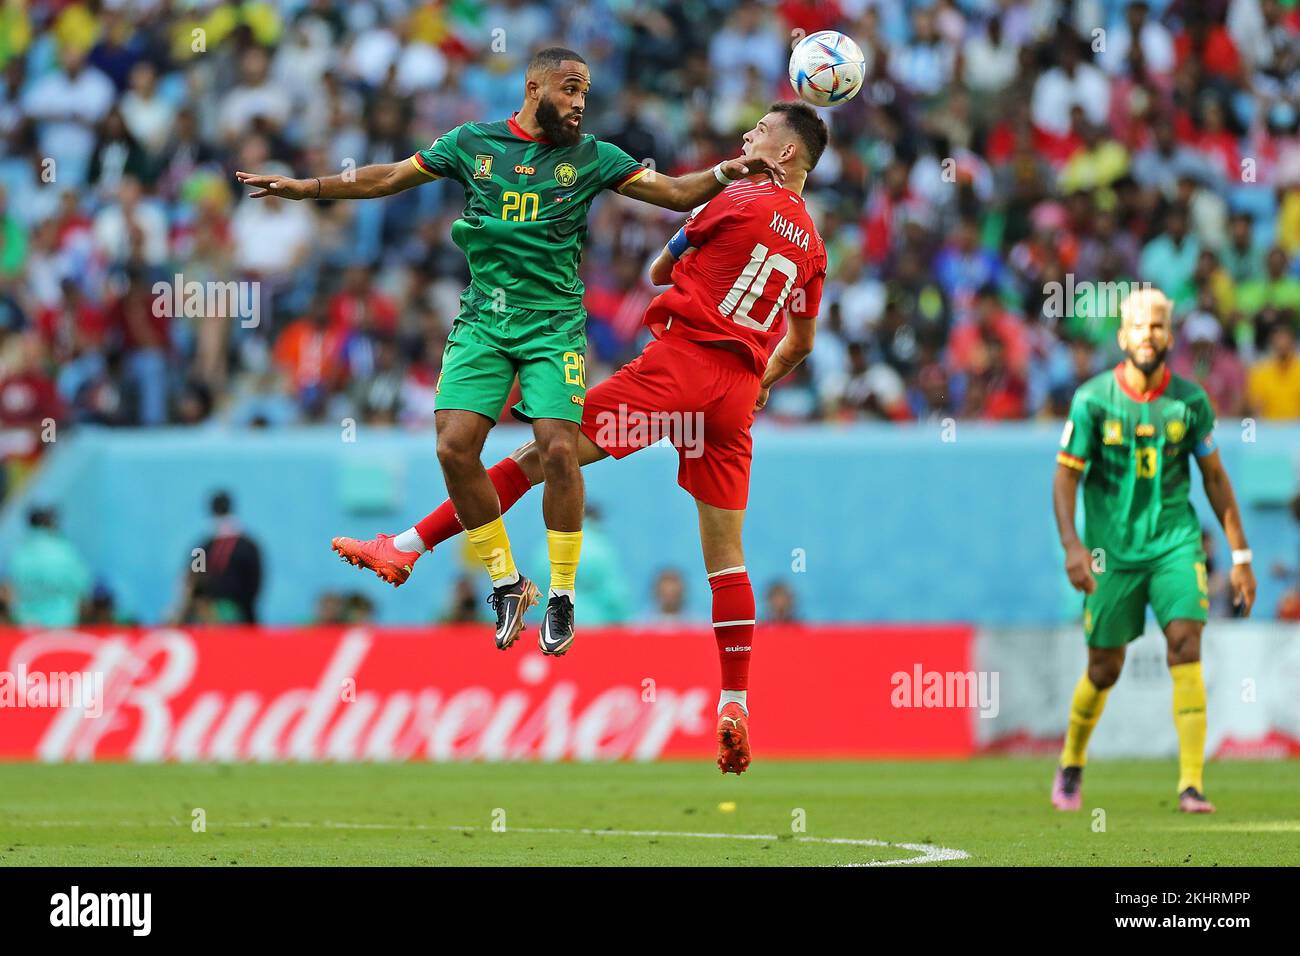 Doha, Qatar. 24th Nov, 2022. Granit Xhaka of Switzerland disputes the bid with Bryan Mbeumo of Cameroon, during the match between Switzerland and Cameroon, for the 1st round of Group G of the FIFA World Cup Qatar 2022, Al Janoub Stadium this Thursday 24. 30761 (Heuler Andrey/SPP) Credit: SPP Sport Press Photo. /Alamy Live News Stock Photo